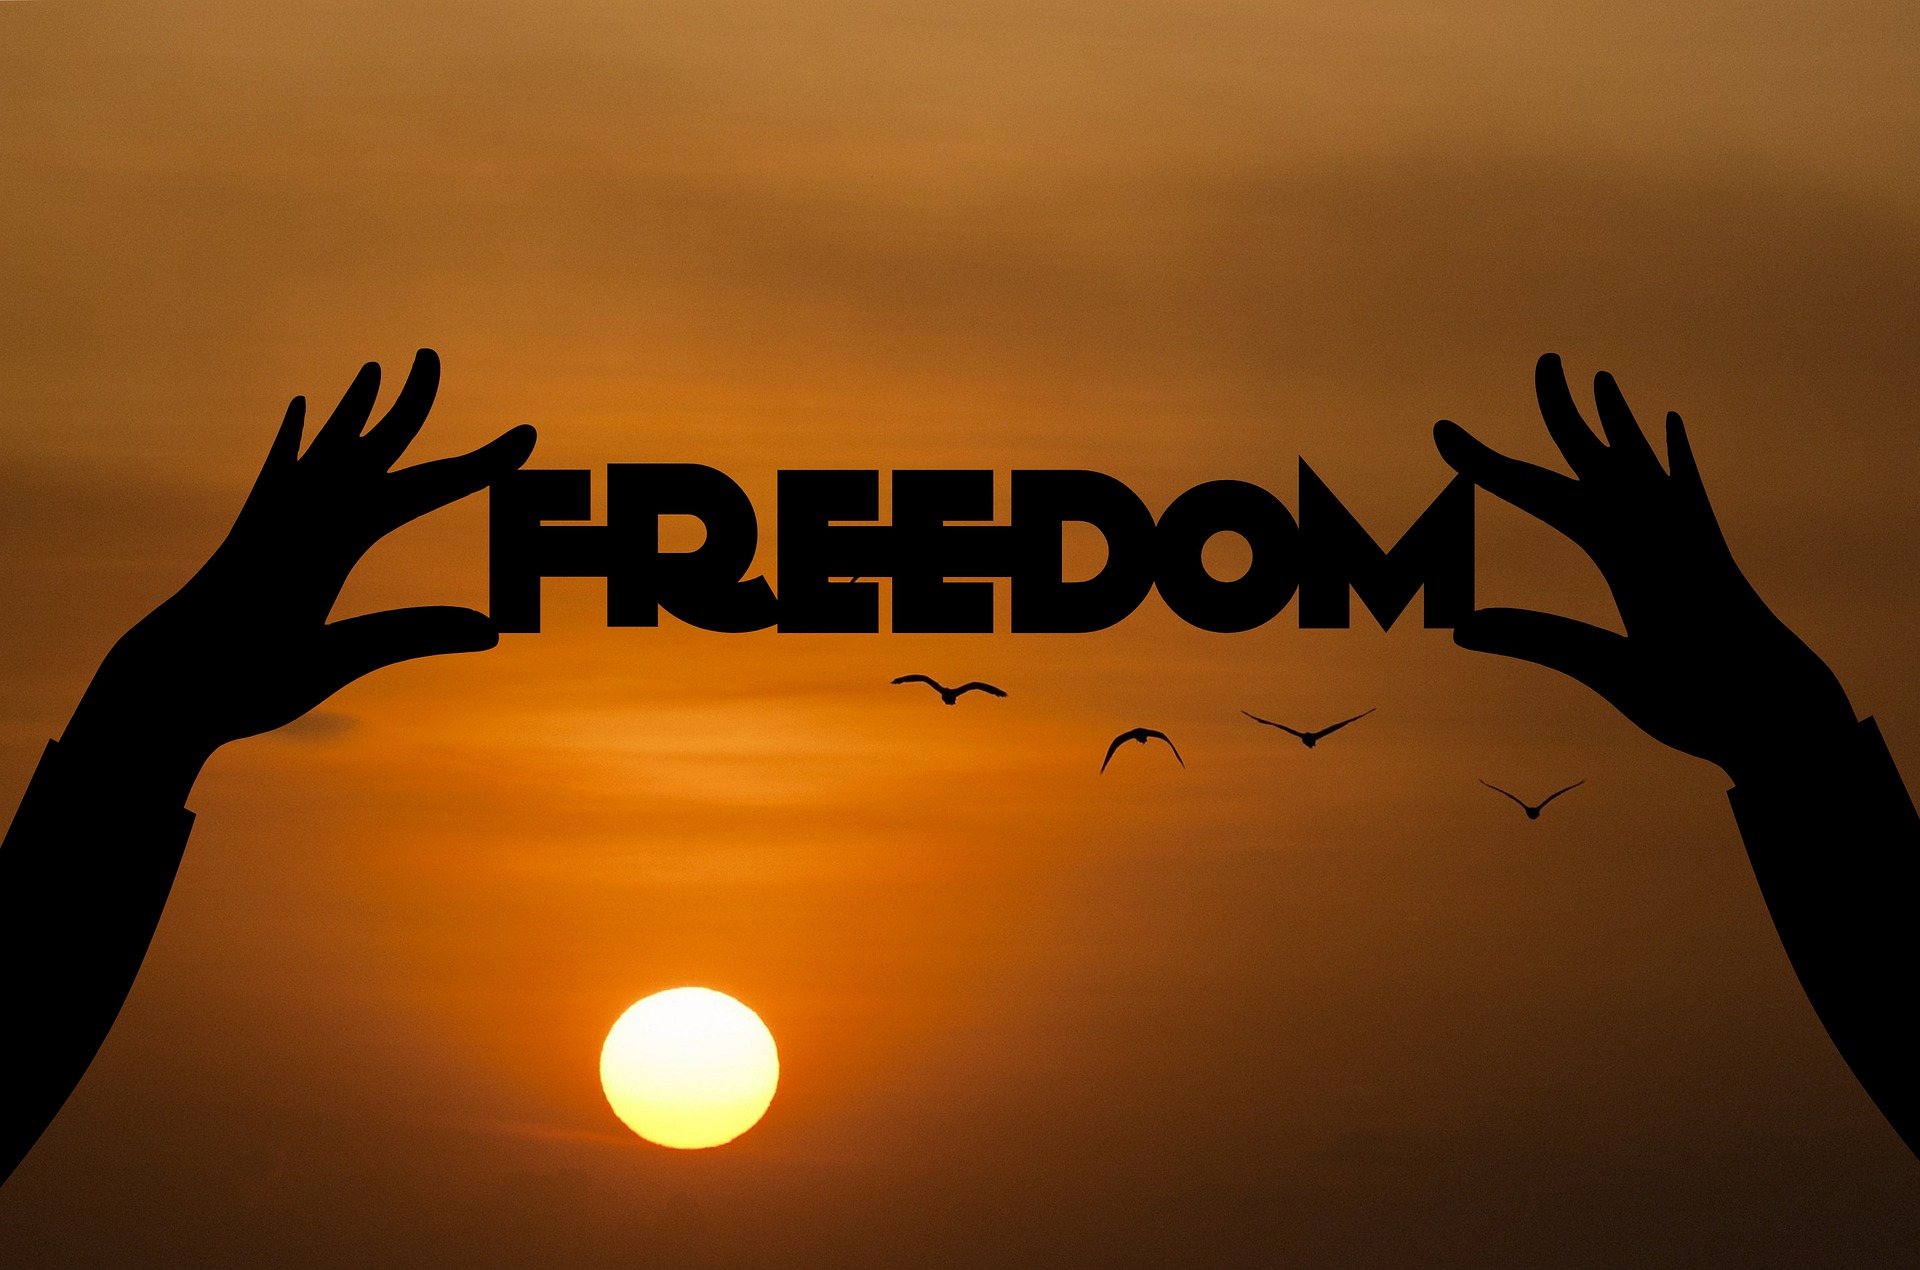 your freedom